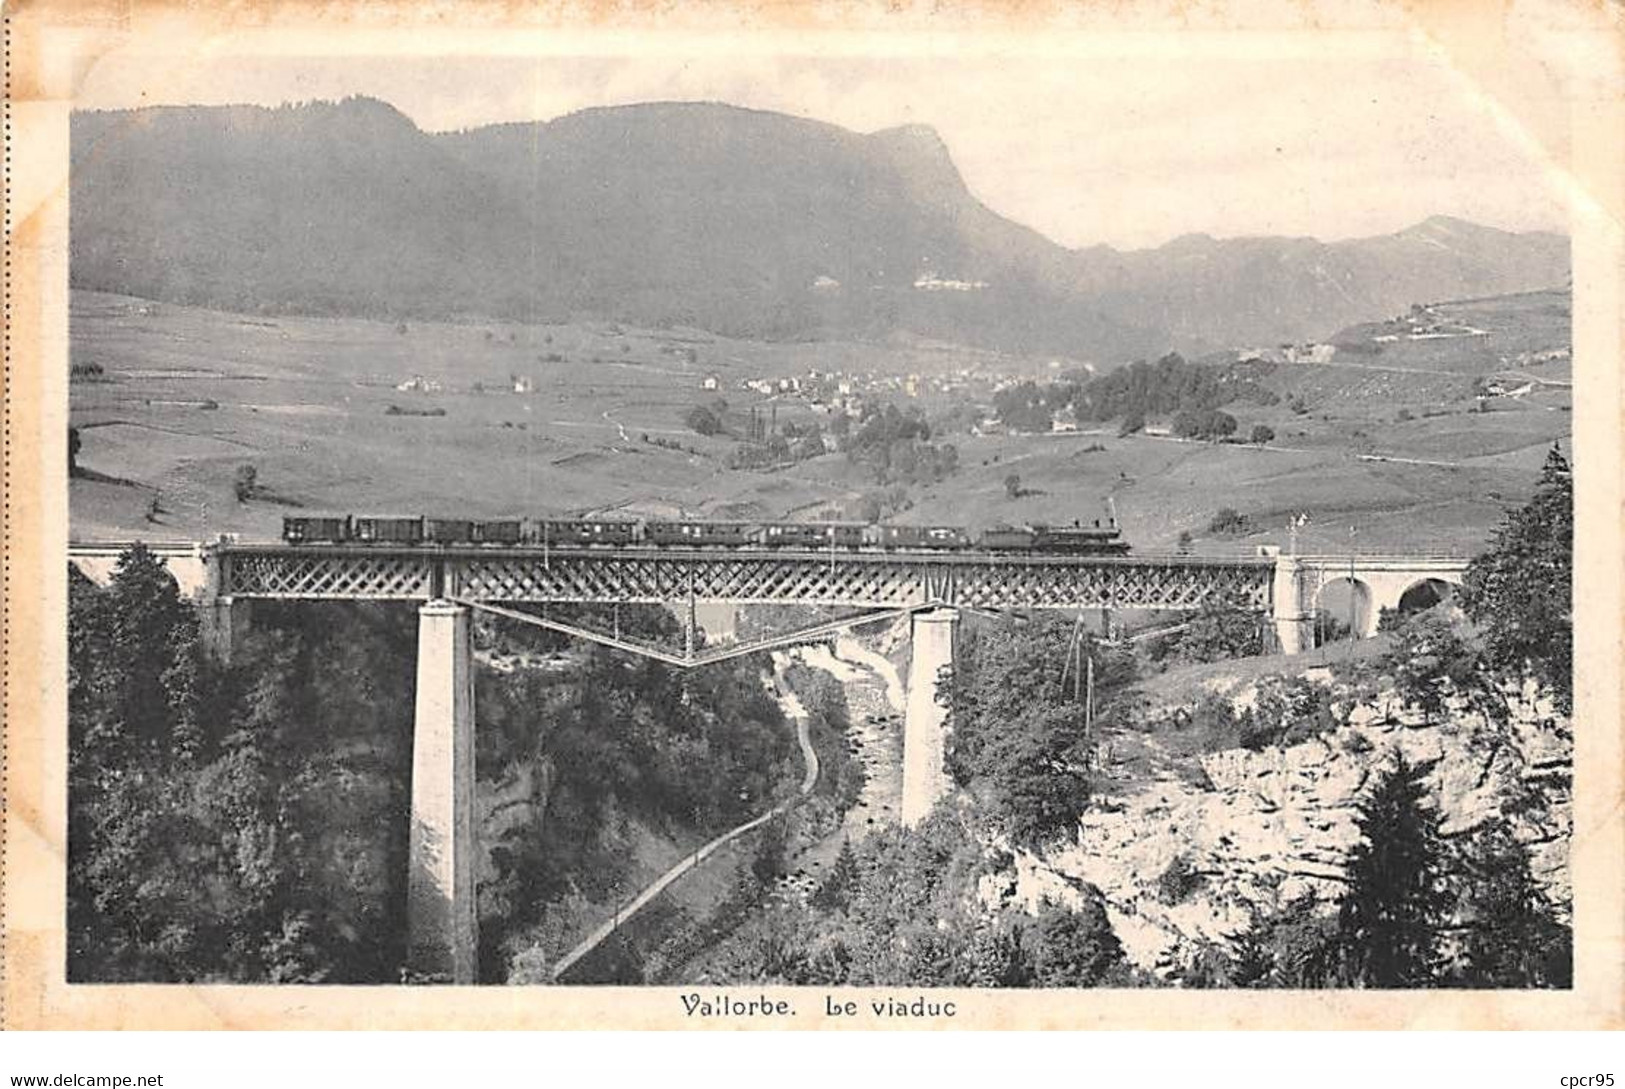 Suisse - N°73842 - VALLORBE - Le Viaduc - Vallorbe